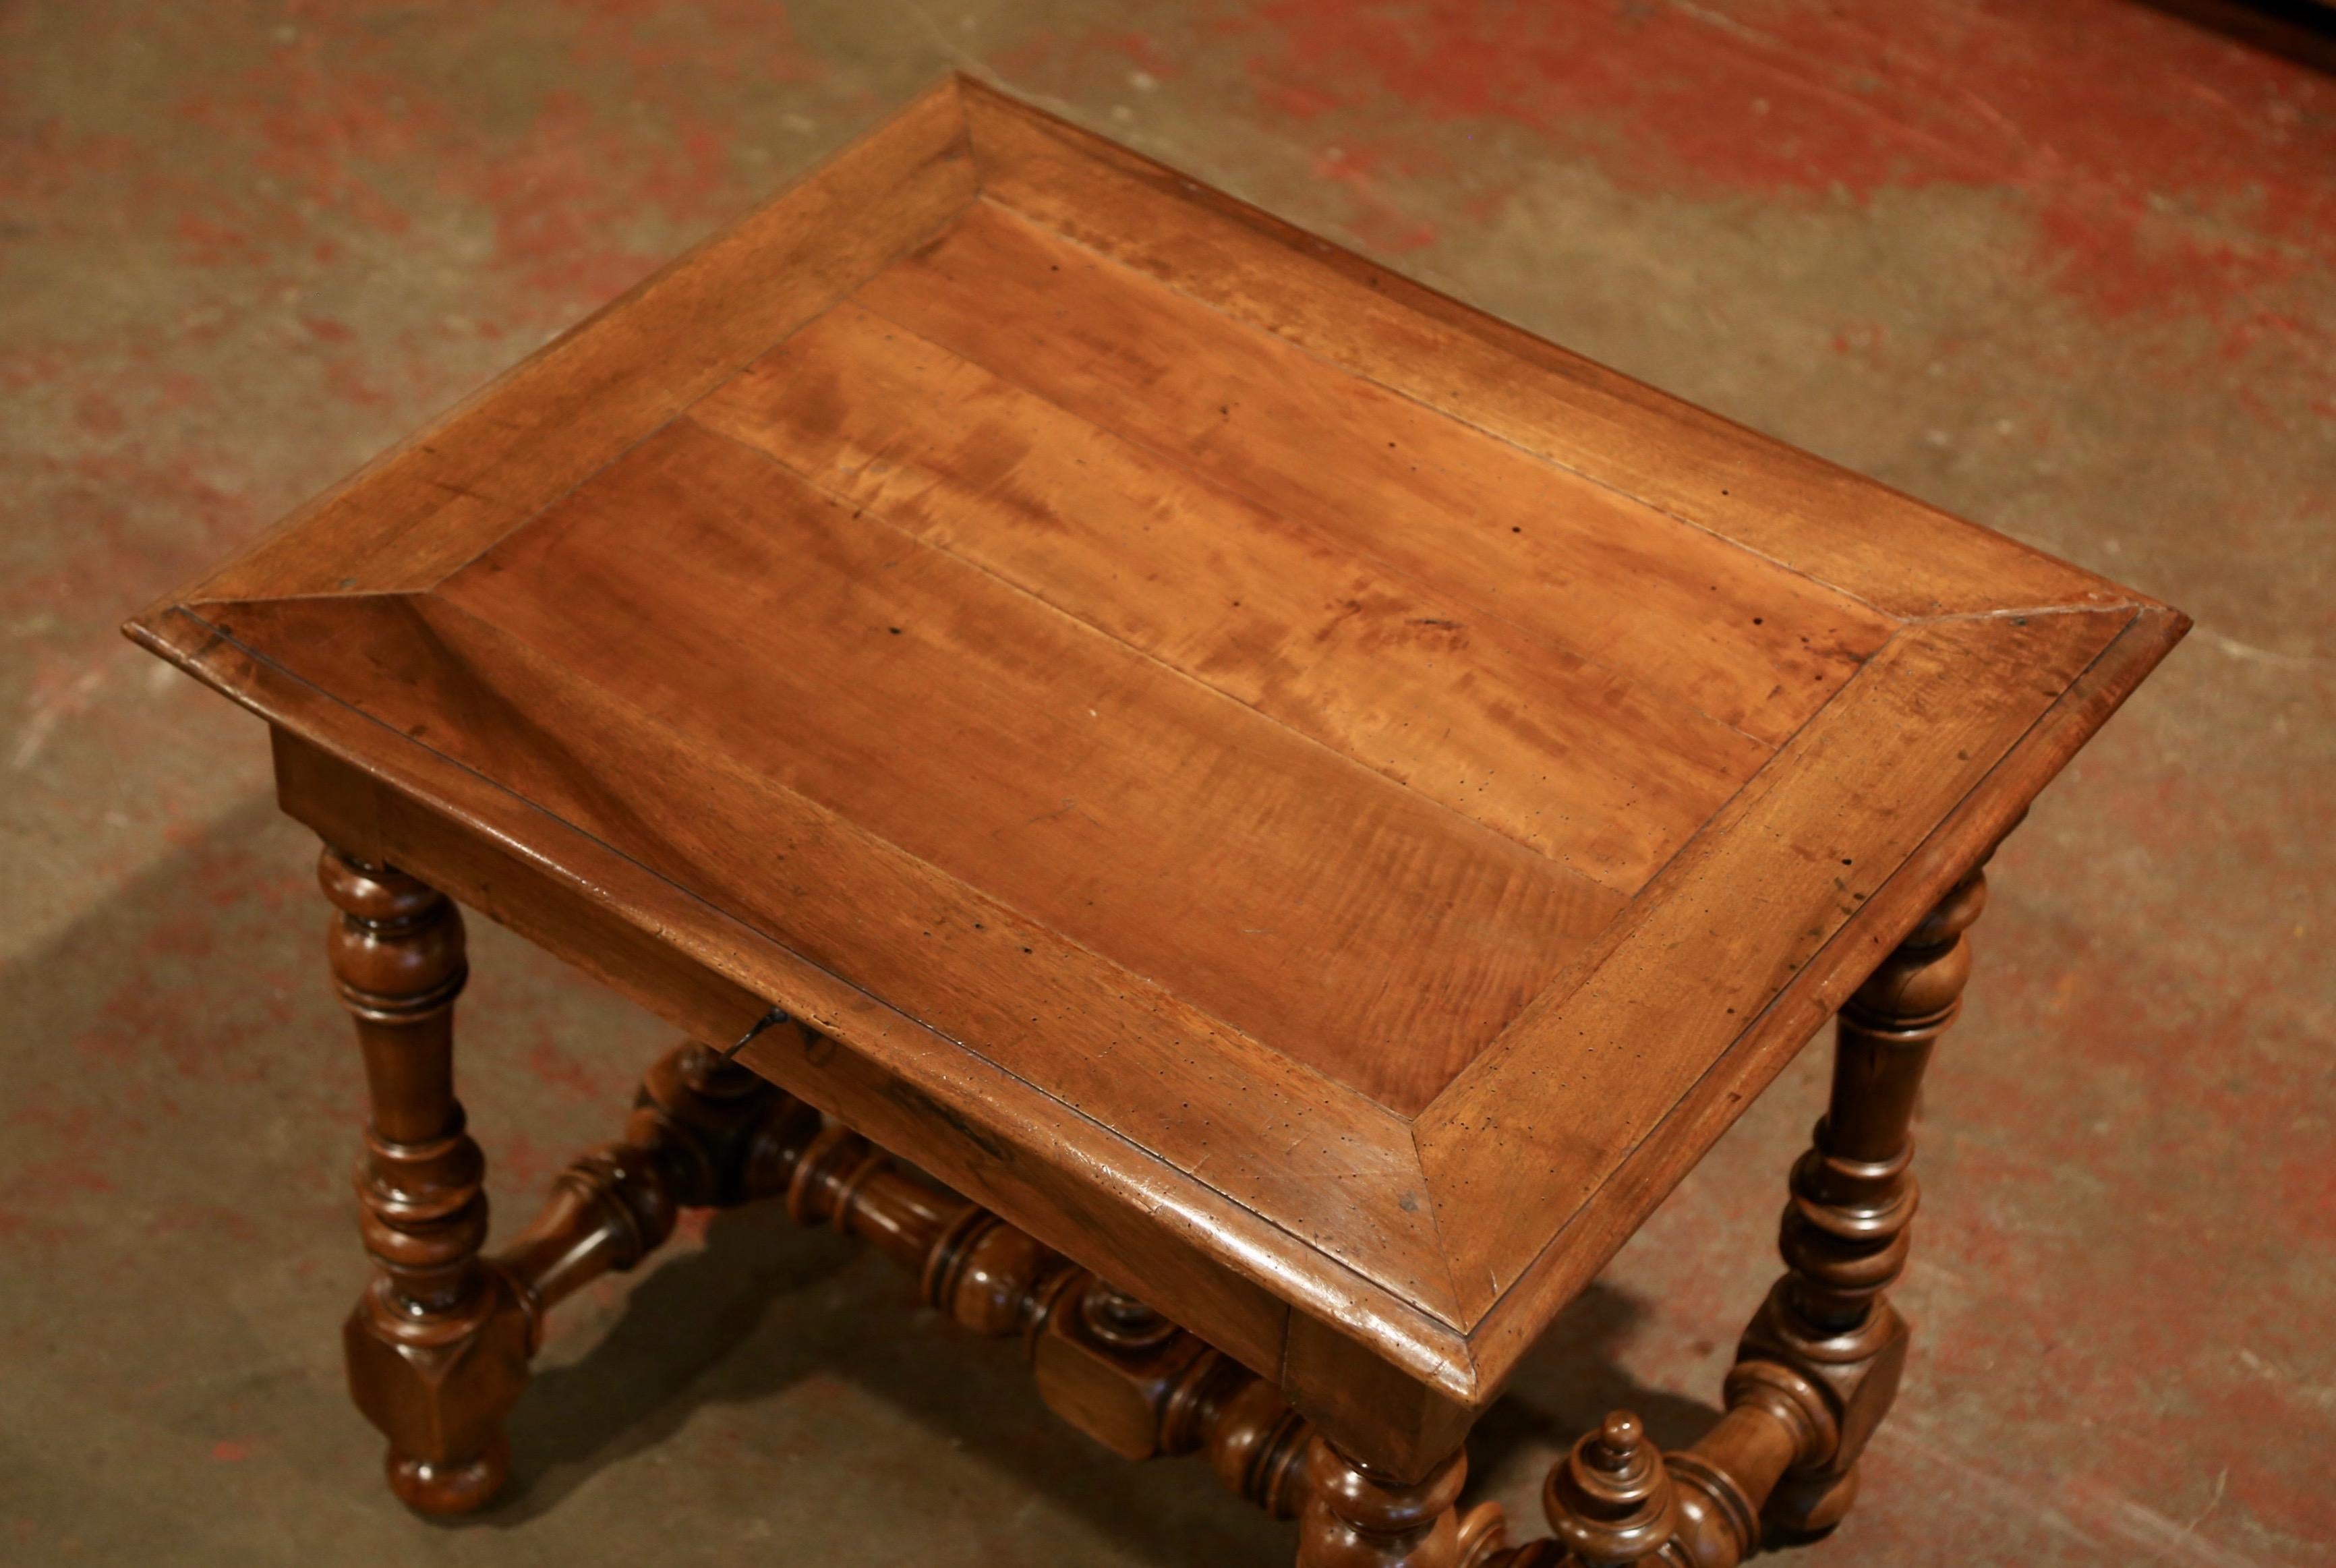 Hand-Carved 19th Century Louis XIII Carved Walnut and Pear Table with Decorative Finials